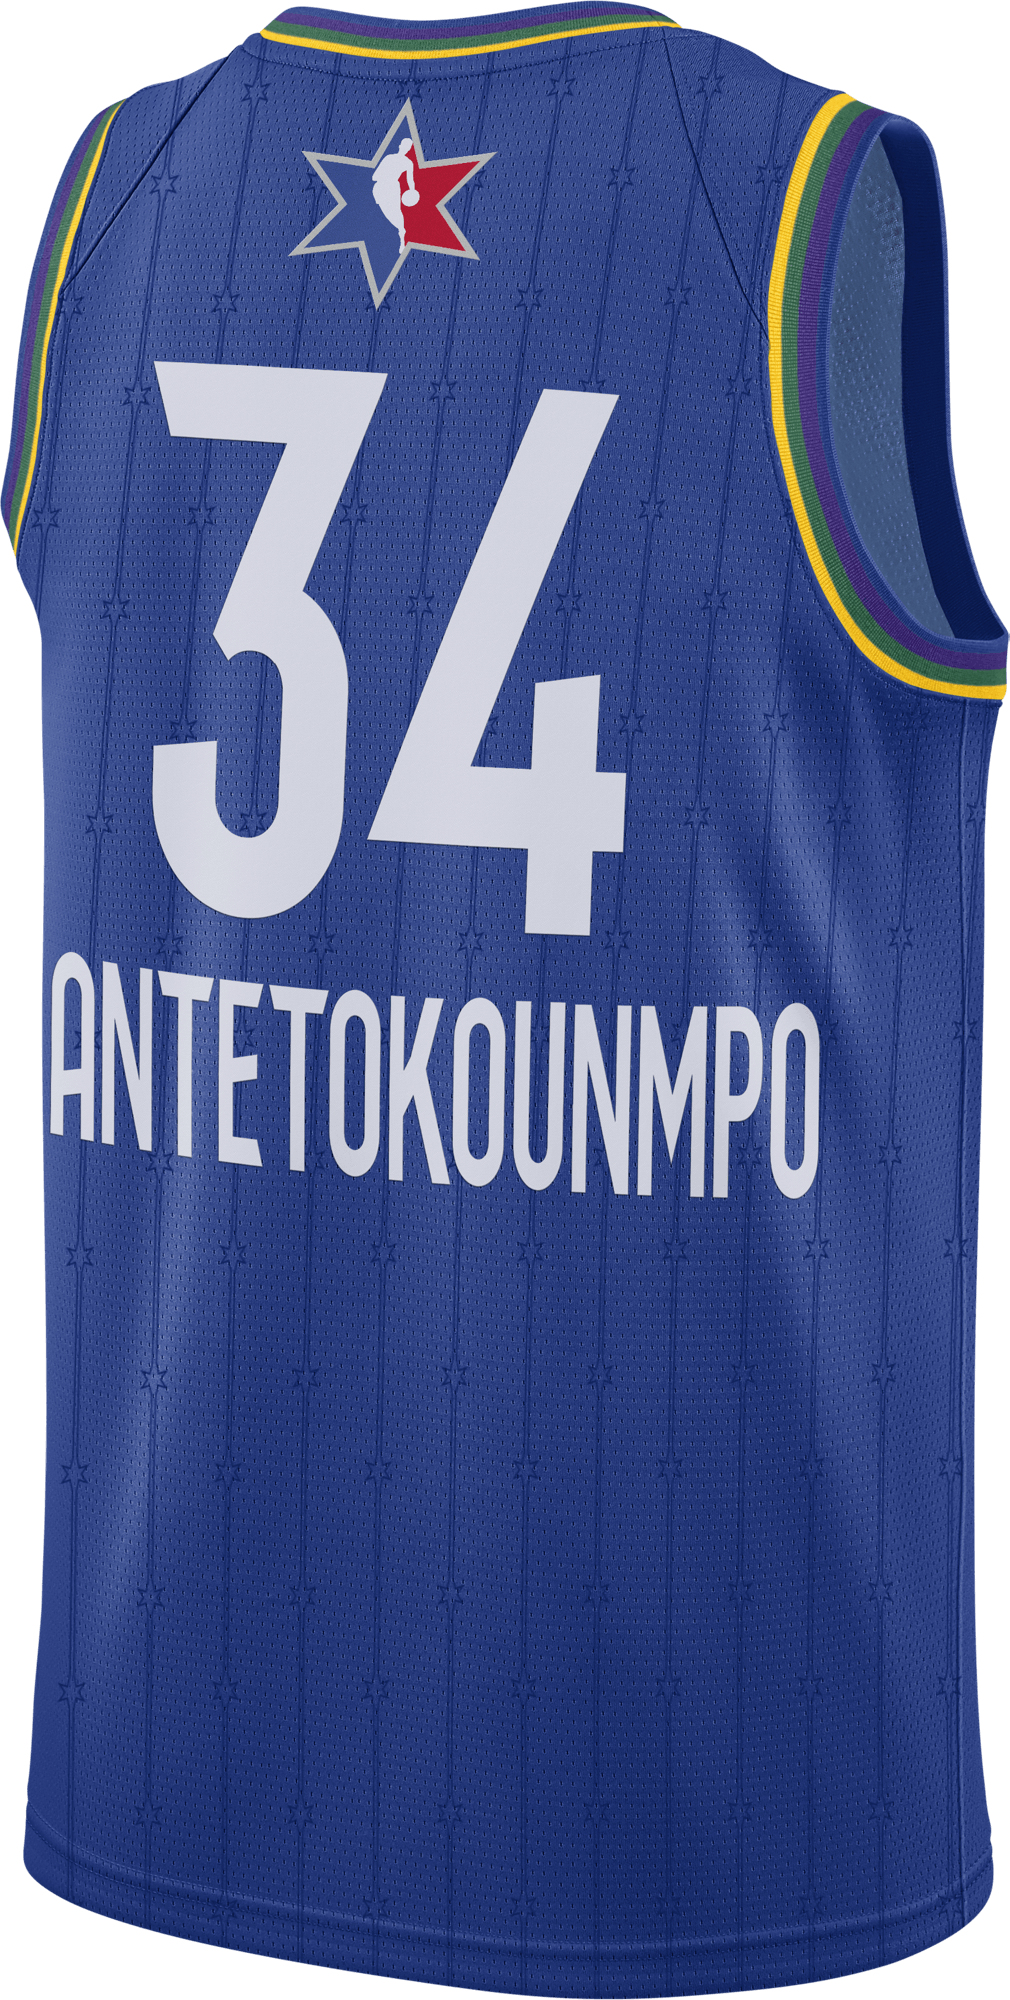 ALL-STAR JERSEY GIANNIS